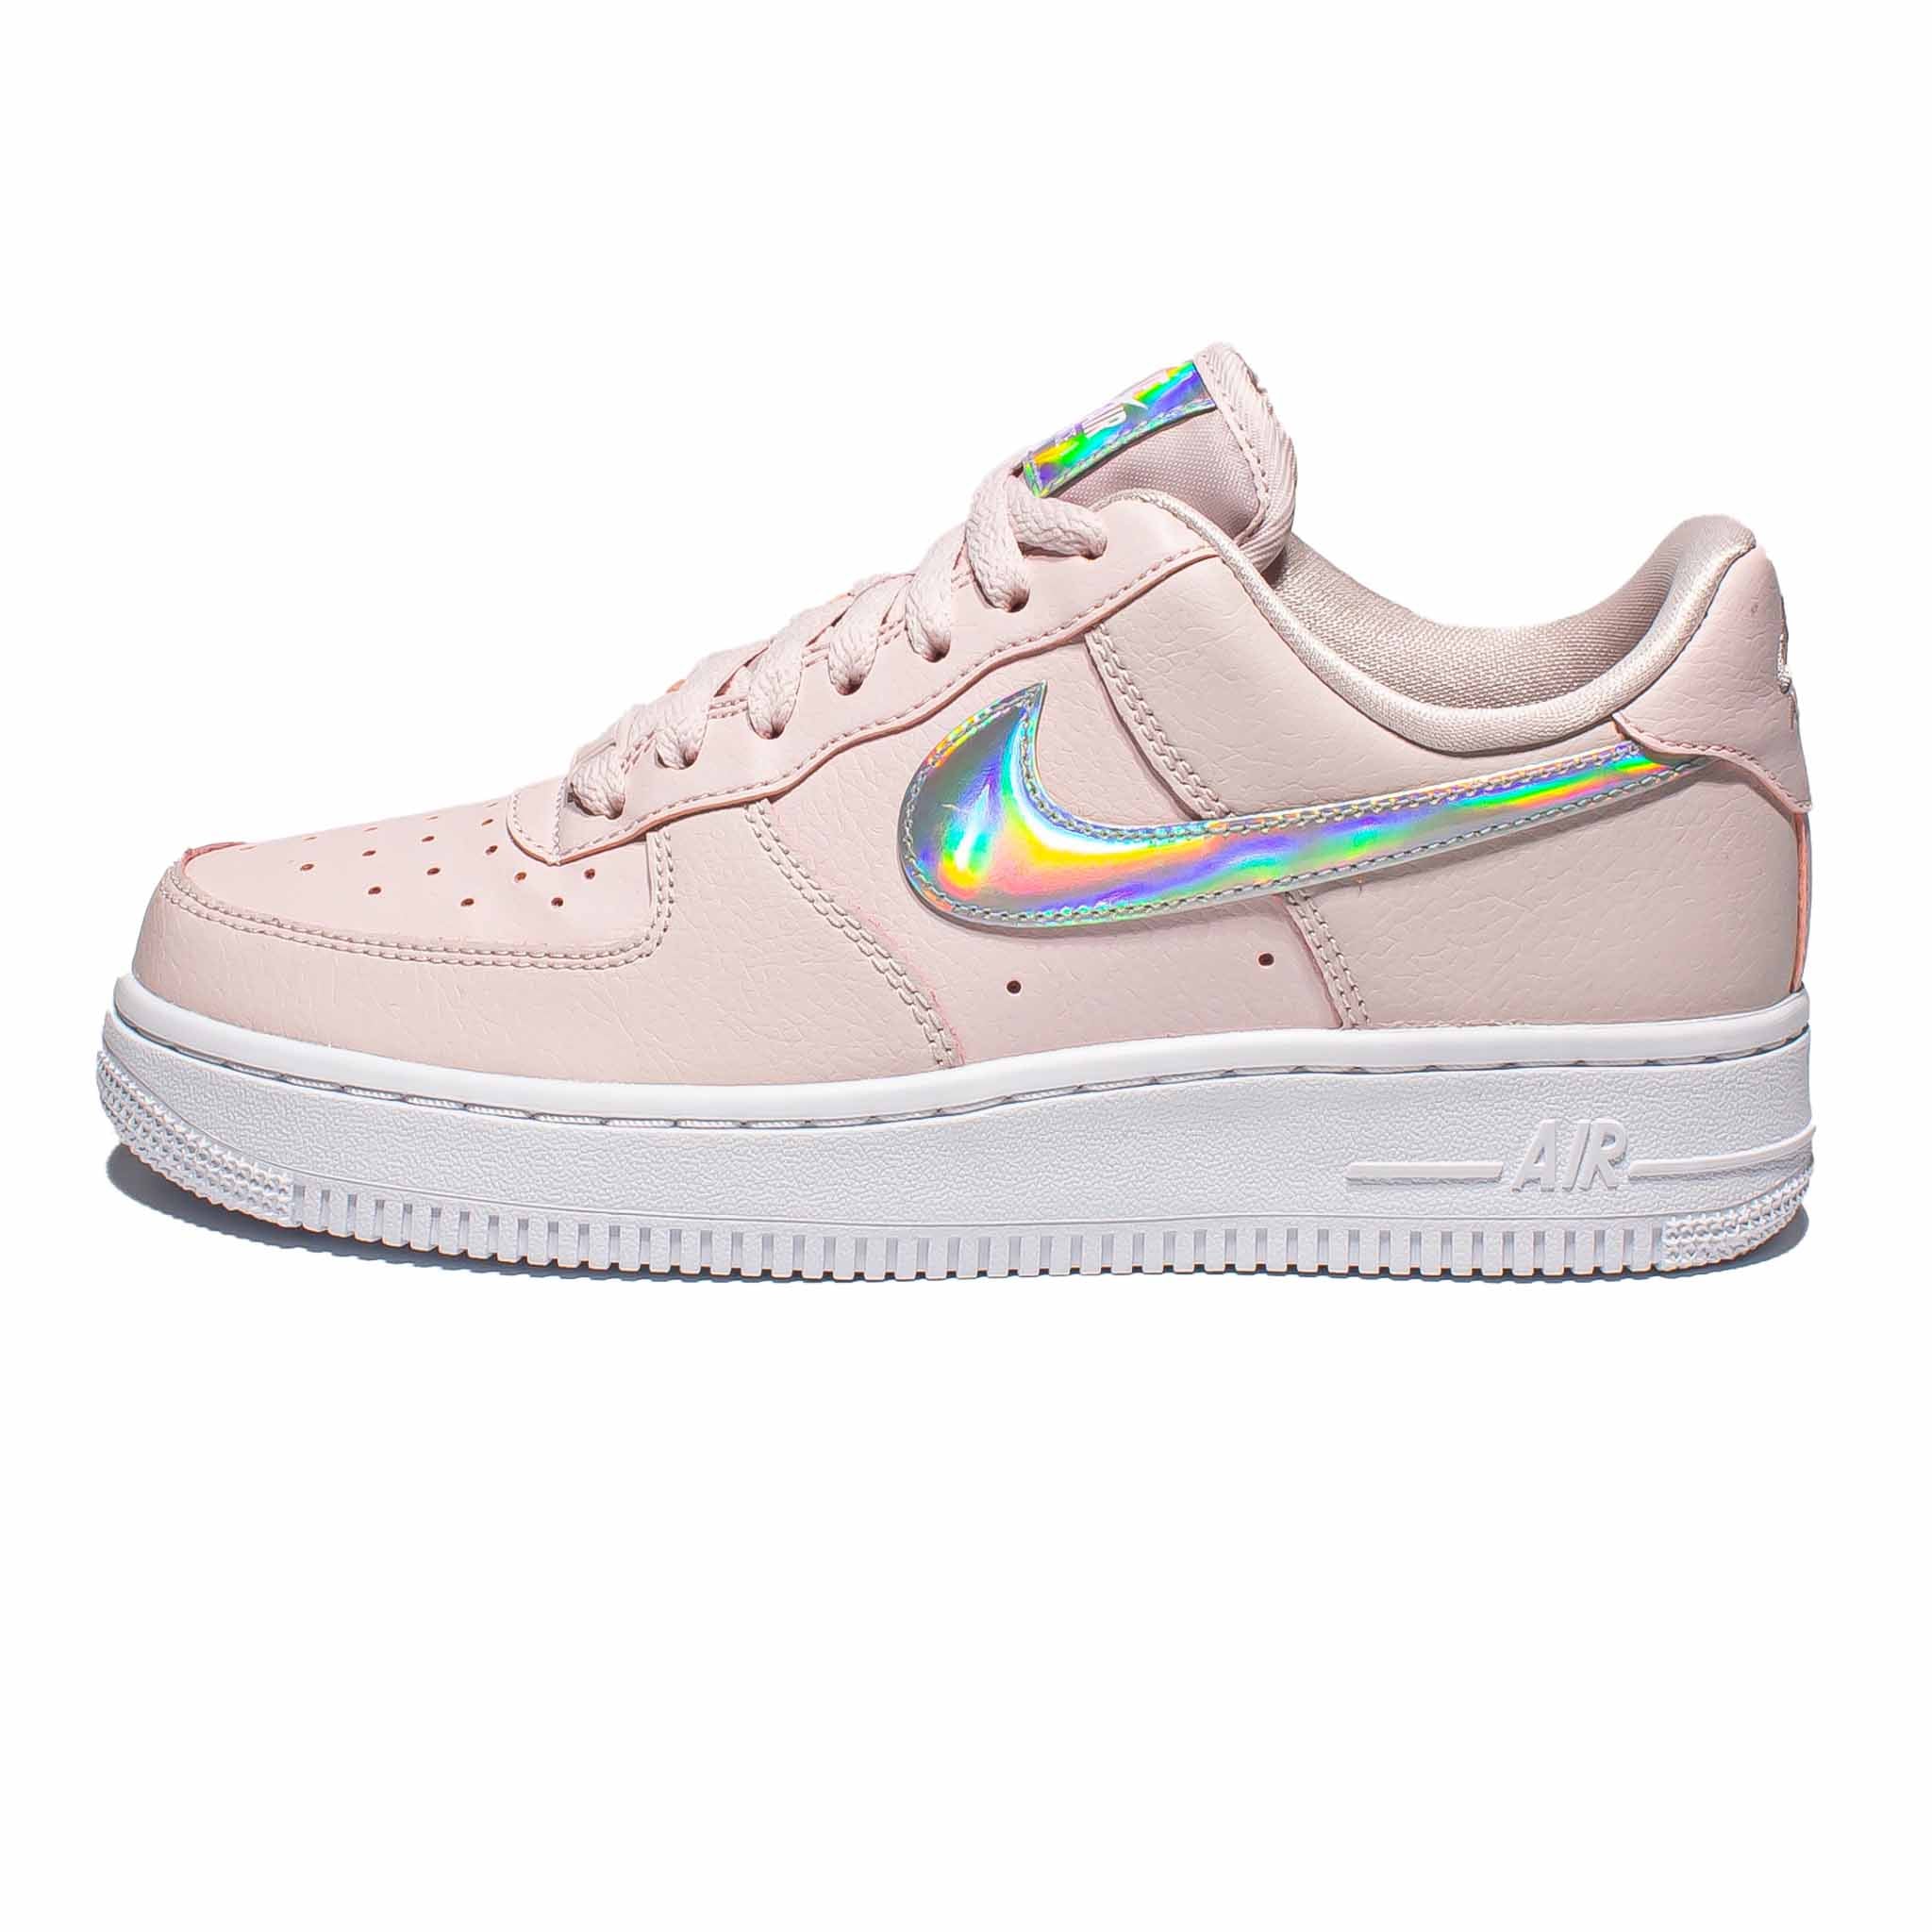 Nike Air Force 1 '07 Low 'Iridescent Swoosh' Pink